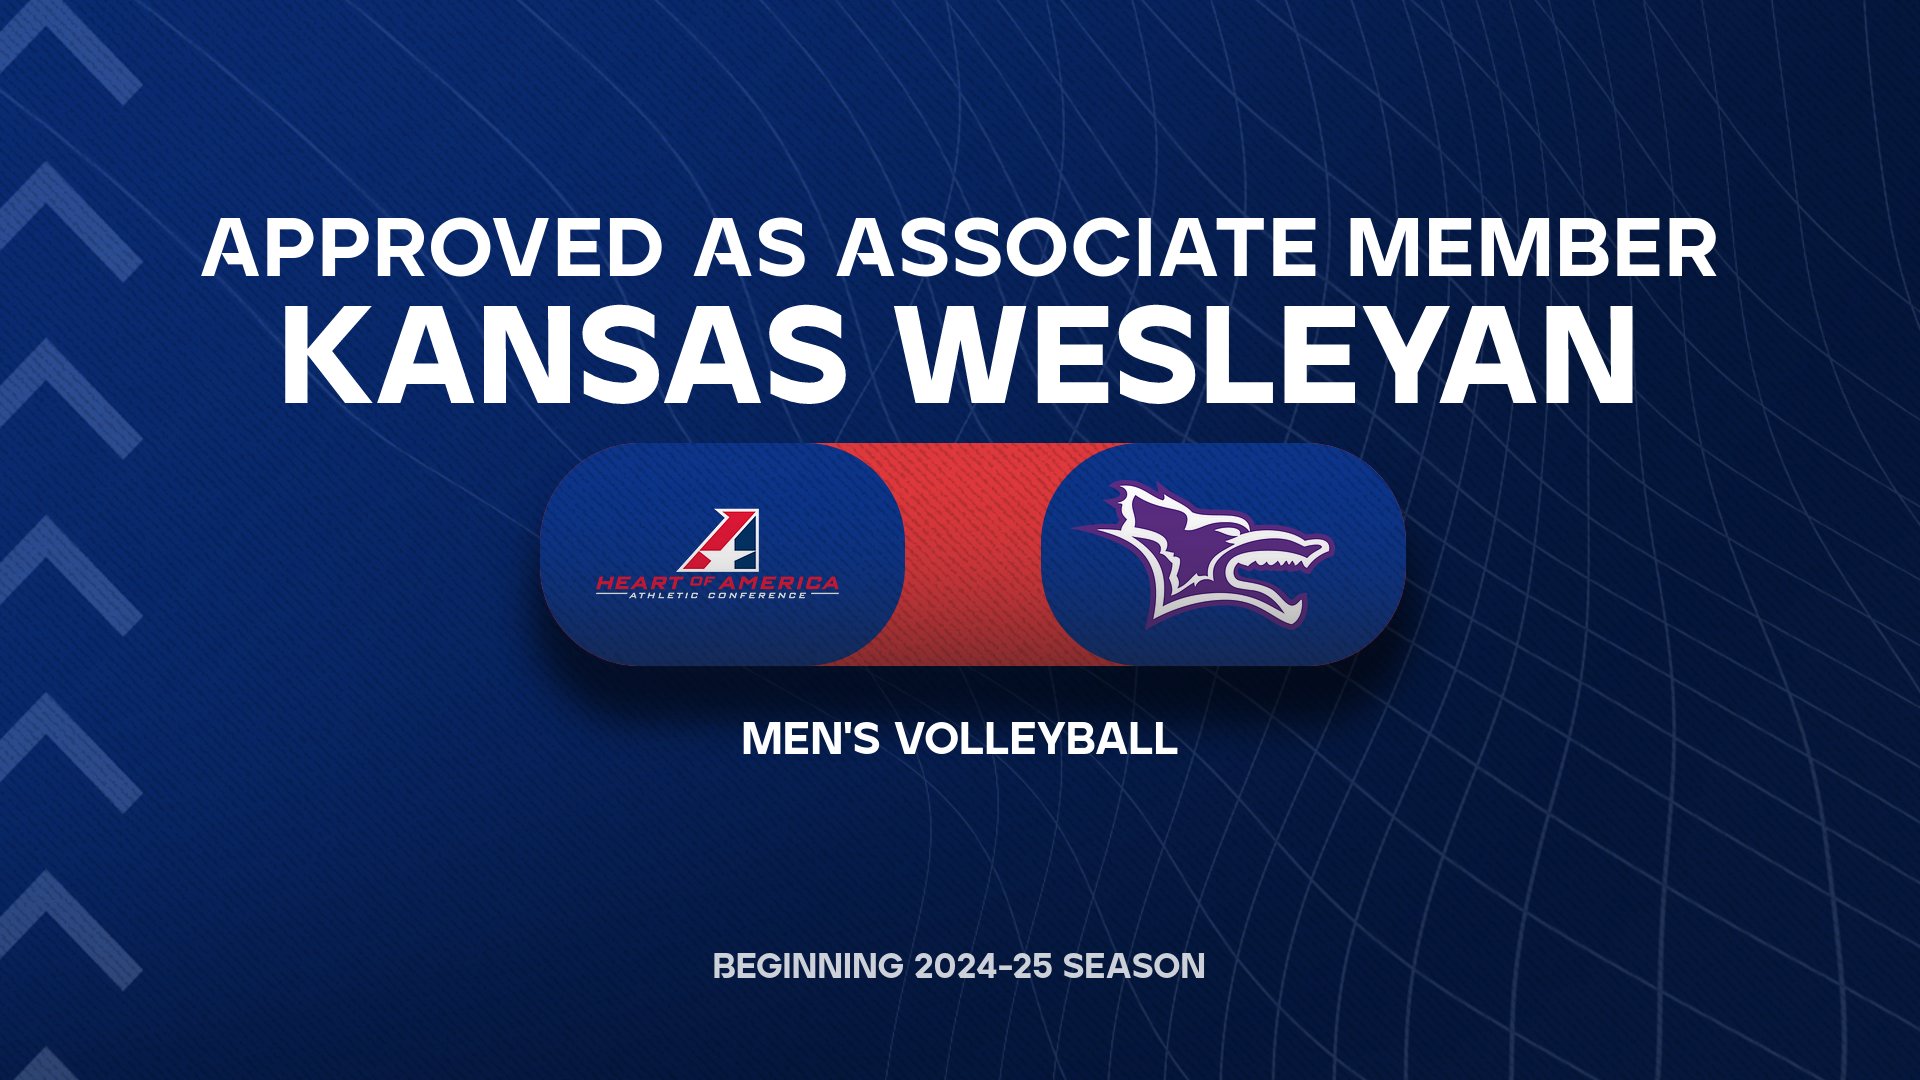 Heart of America Athletic Conference Welcomes Kansas Wesleyan as Associate Member for Men's Volleyball for 2024-25 Season